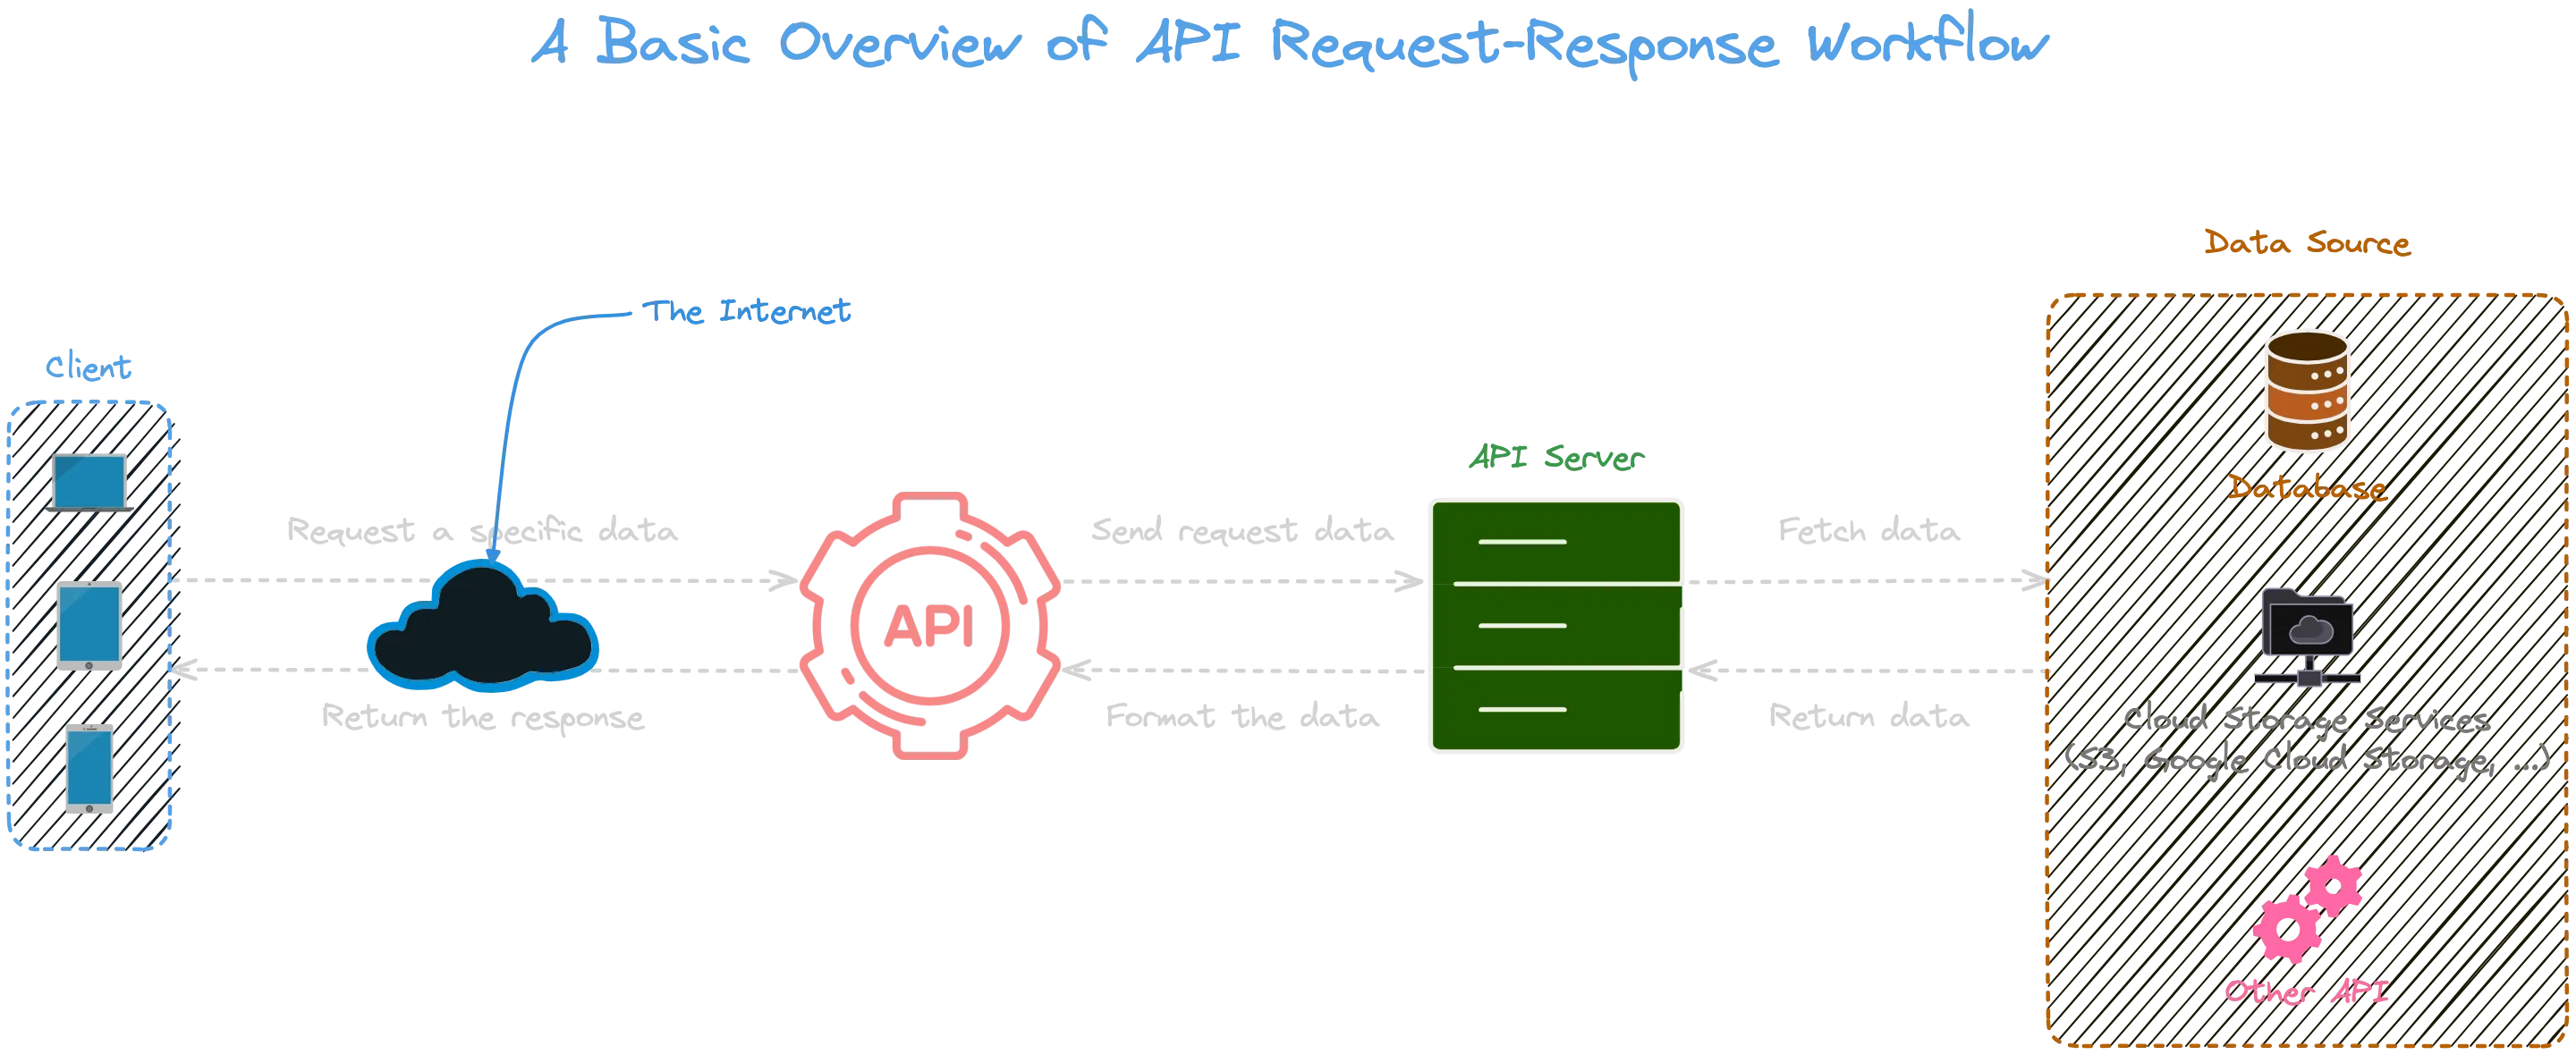 A basic overview od API Request-Response Workflow